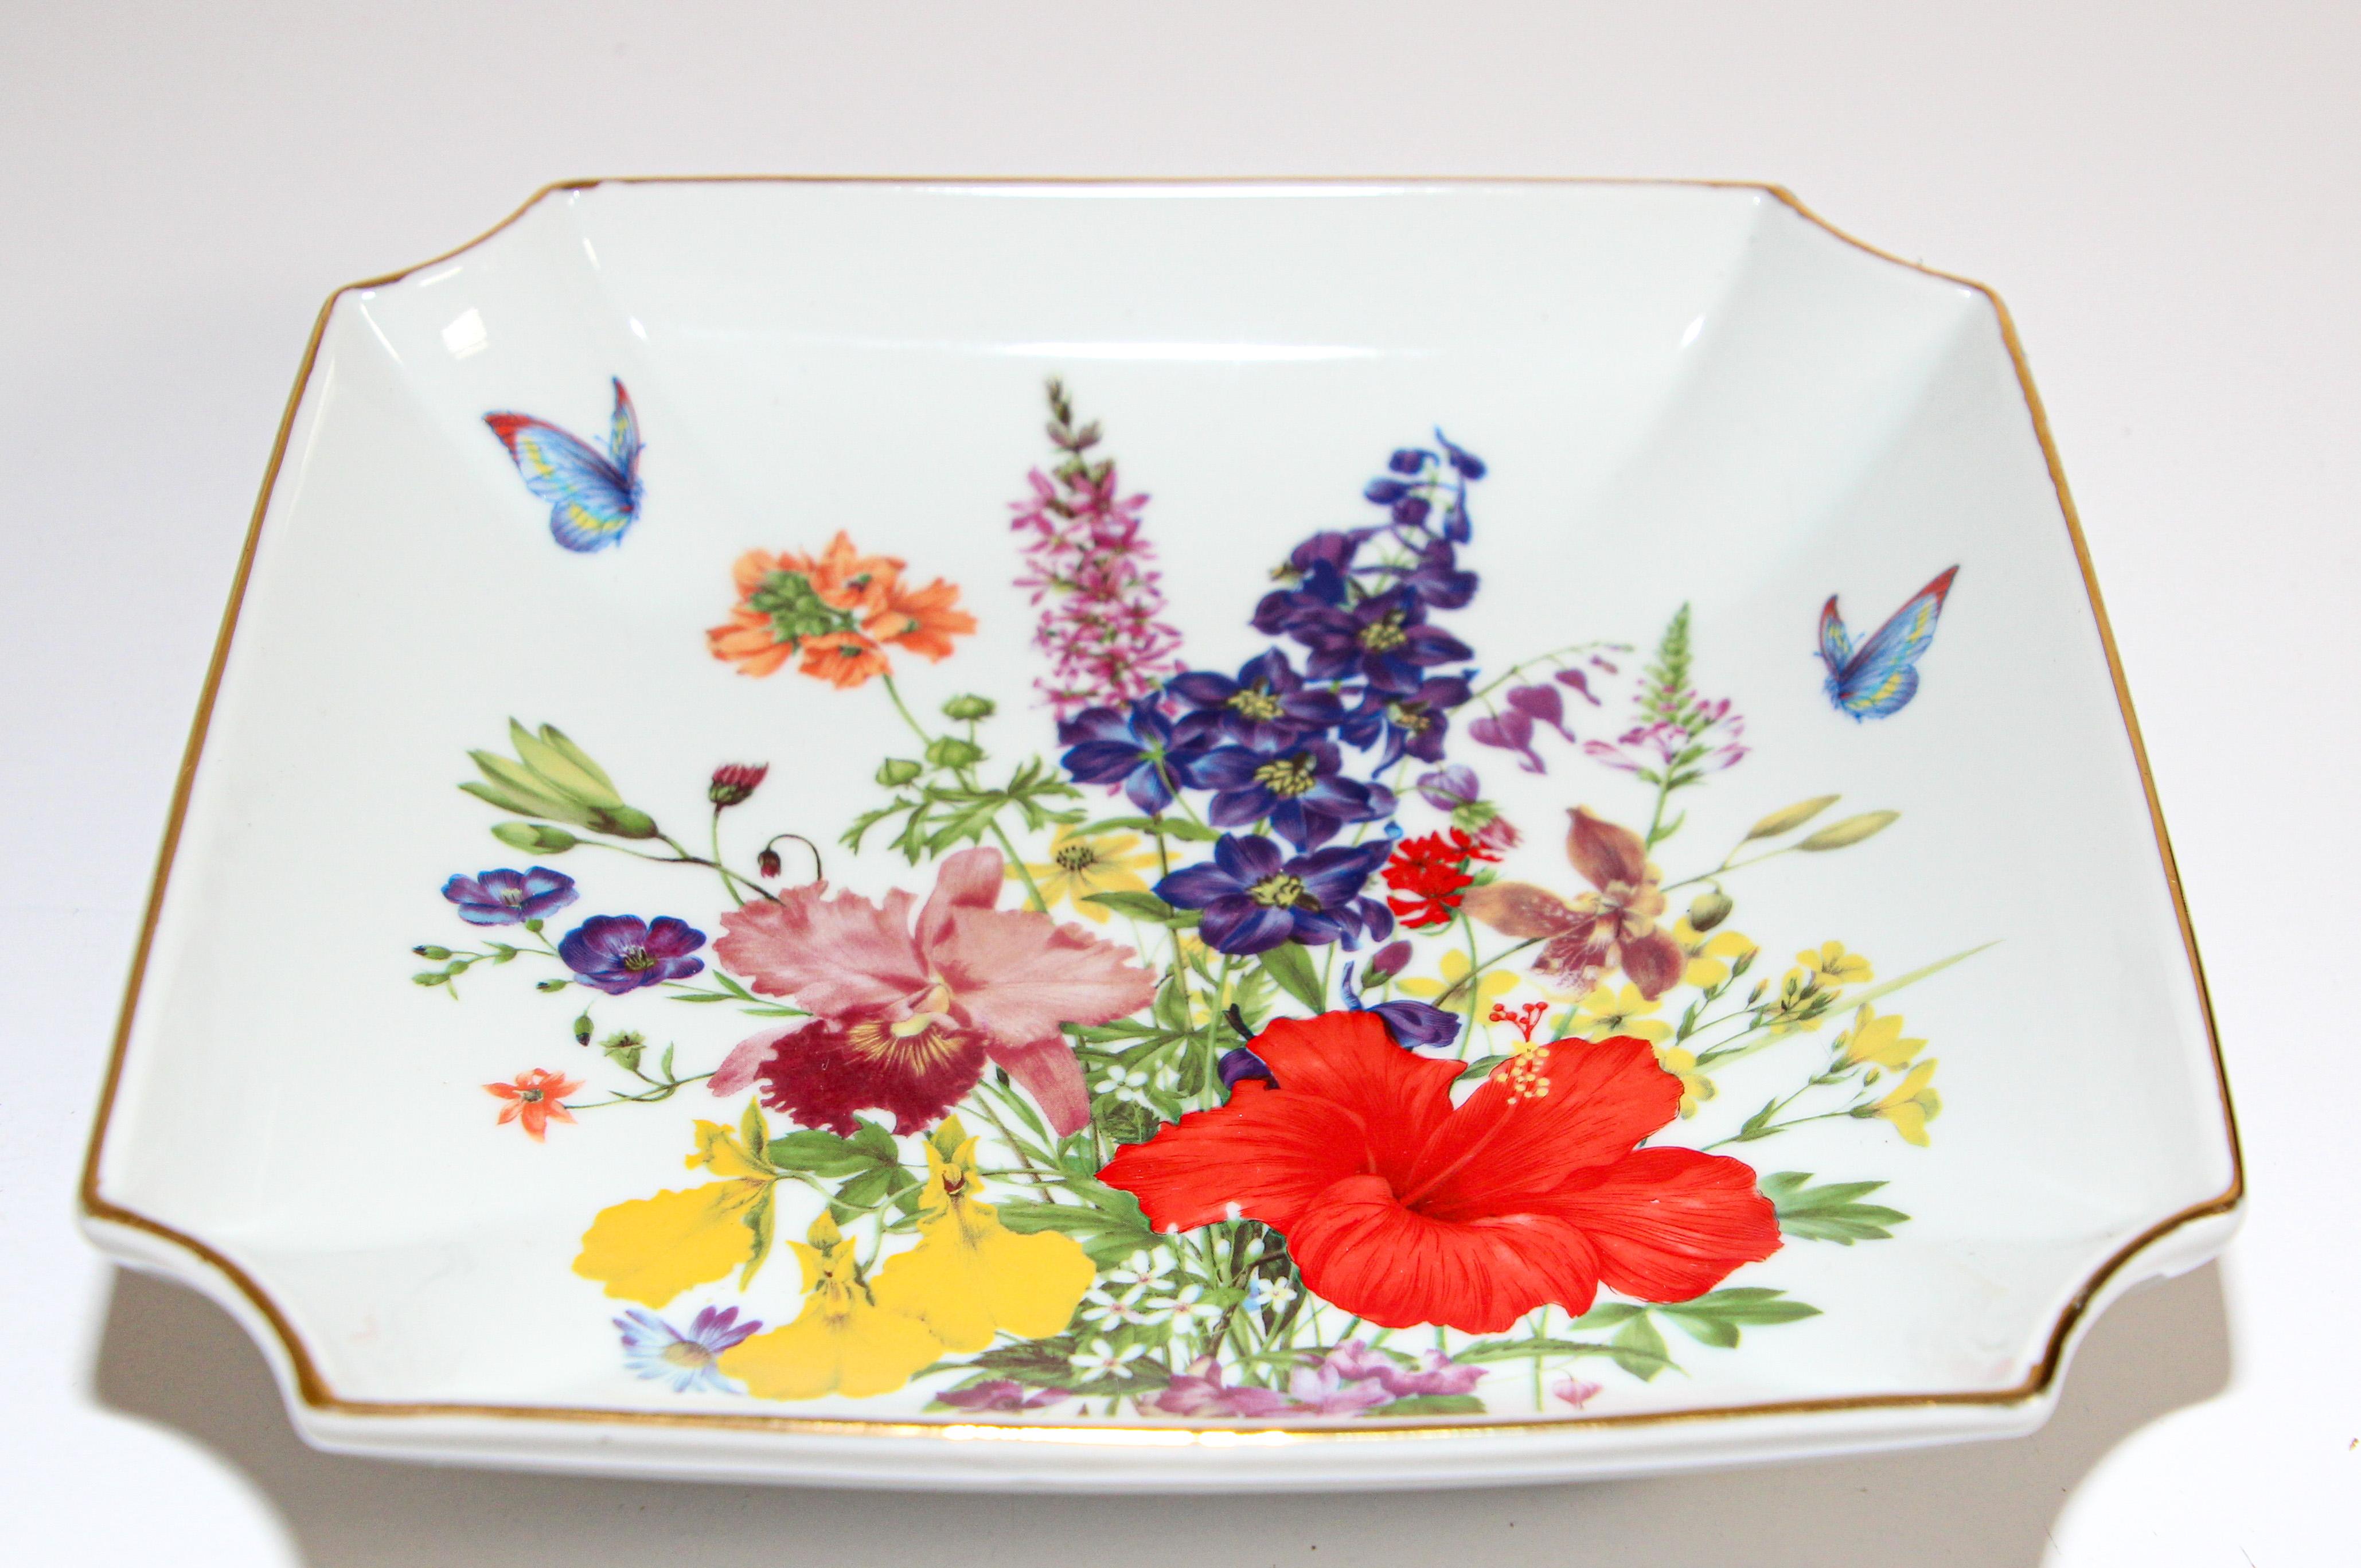 Vintage Japanese decorative porcelain plate beautifully decorated with gorgeous colors and peony design typical of Toyo of Japan, circa 1950s.
It is absolutely beautiful with big bold red, yellow, orange, pink and purple flowers.
Two multicolored